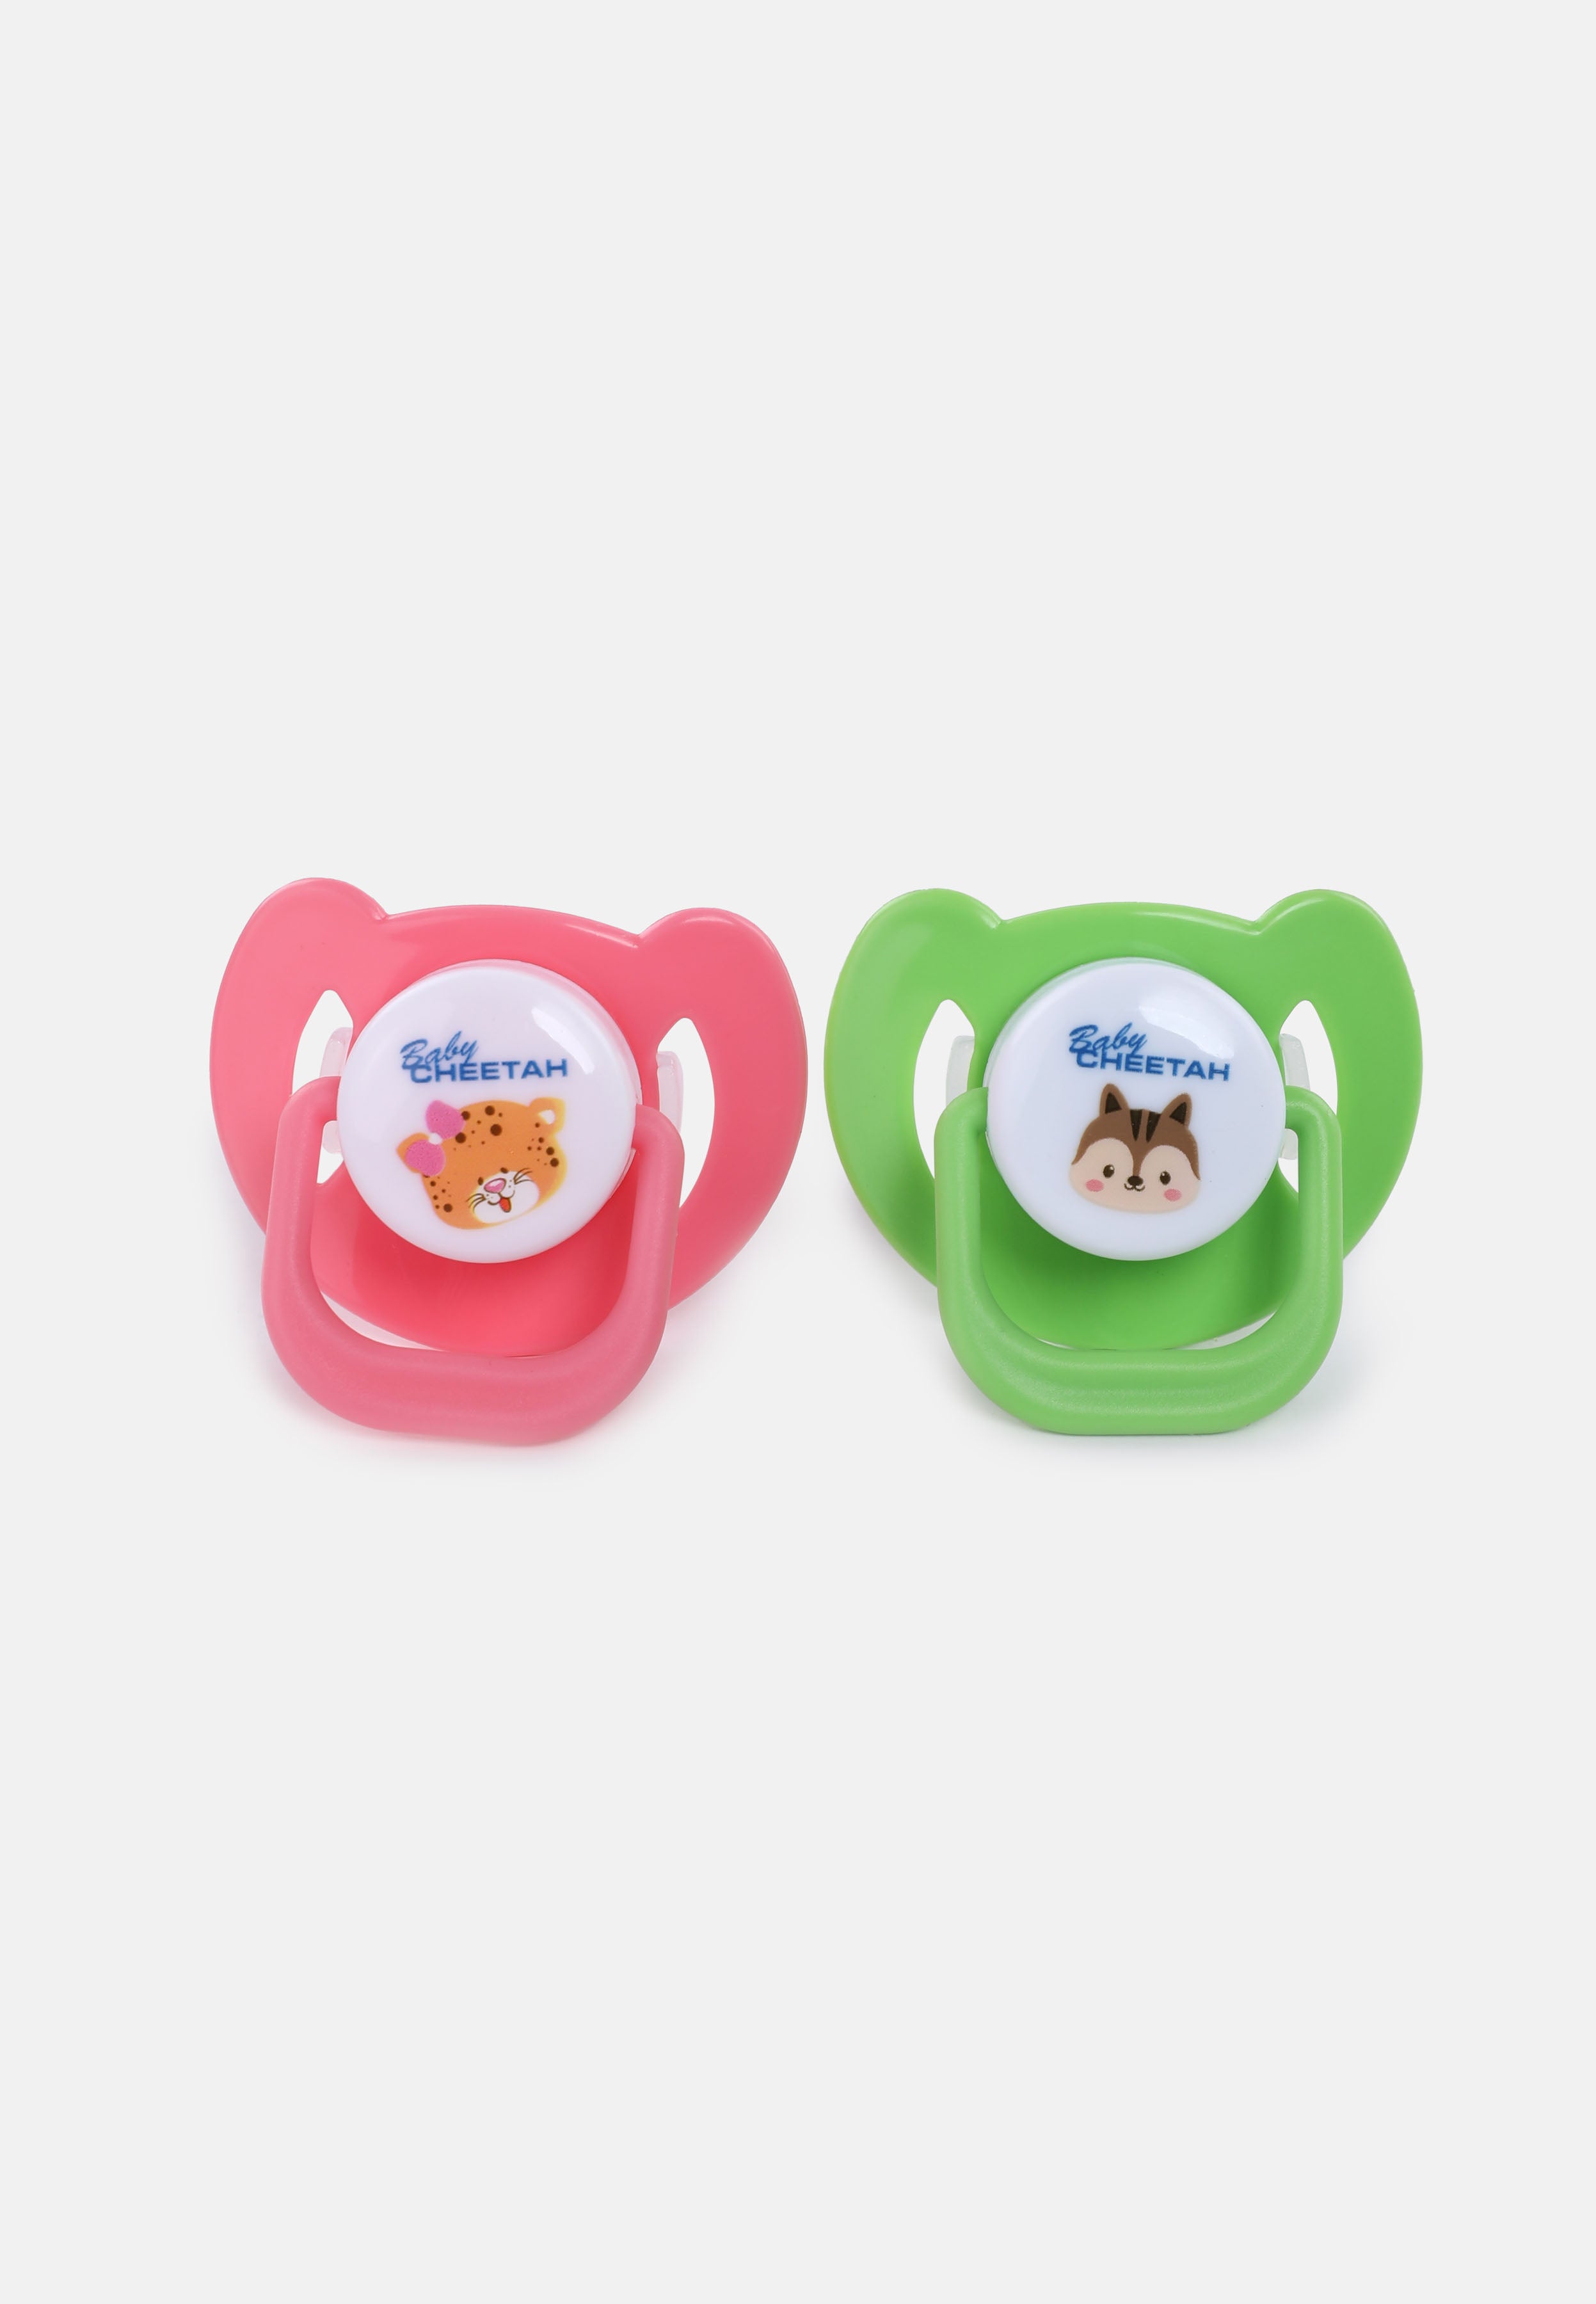 Baby Cheetah Soother with Case (2 IN 1) - Oval Teats (6M+) - CBB-ST21078